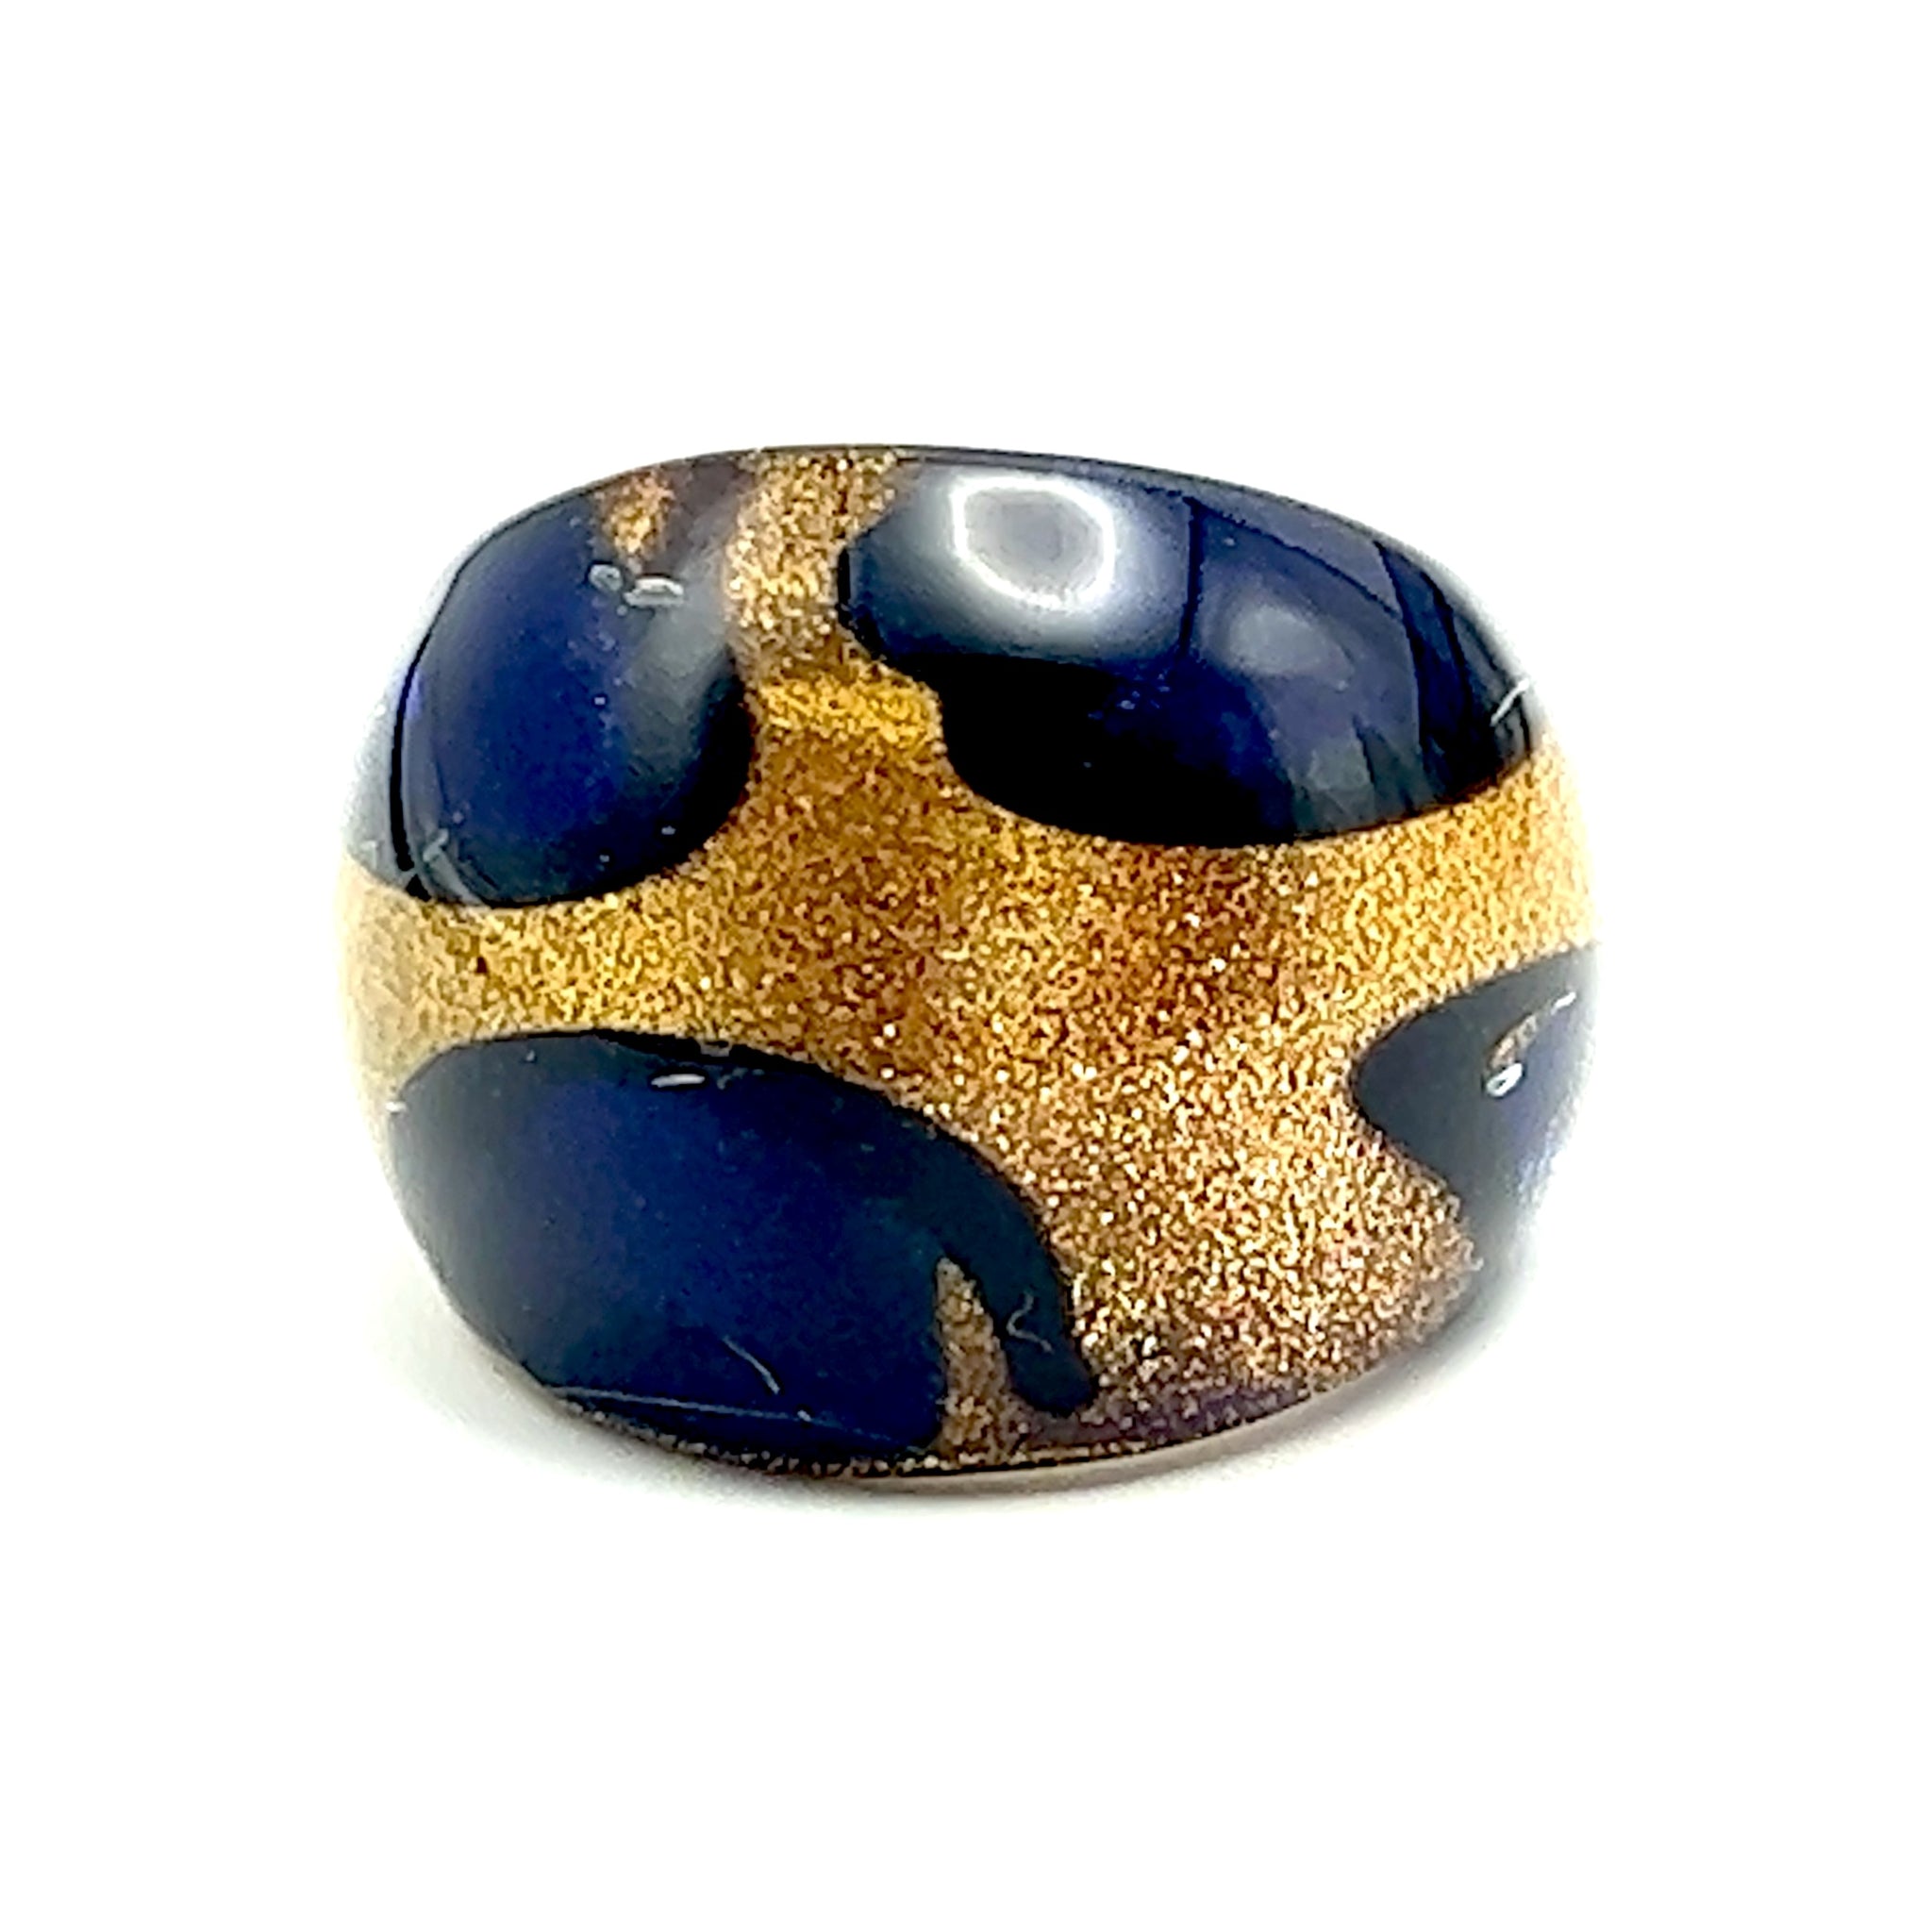 Handmade Glass Acrylic Ring Floral Golden Navy Veils and Infinity Band